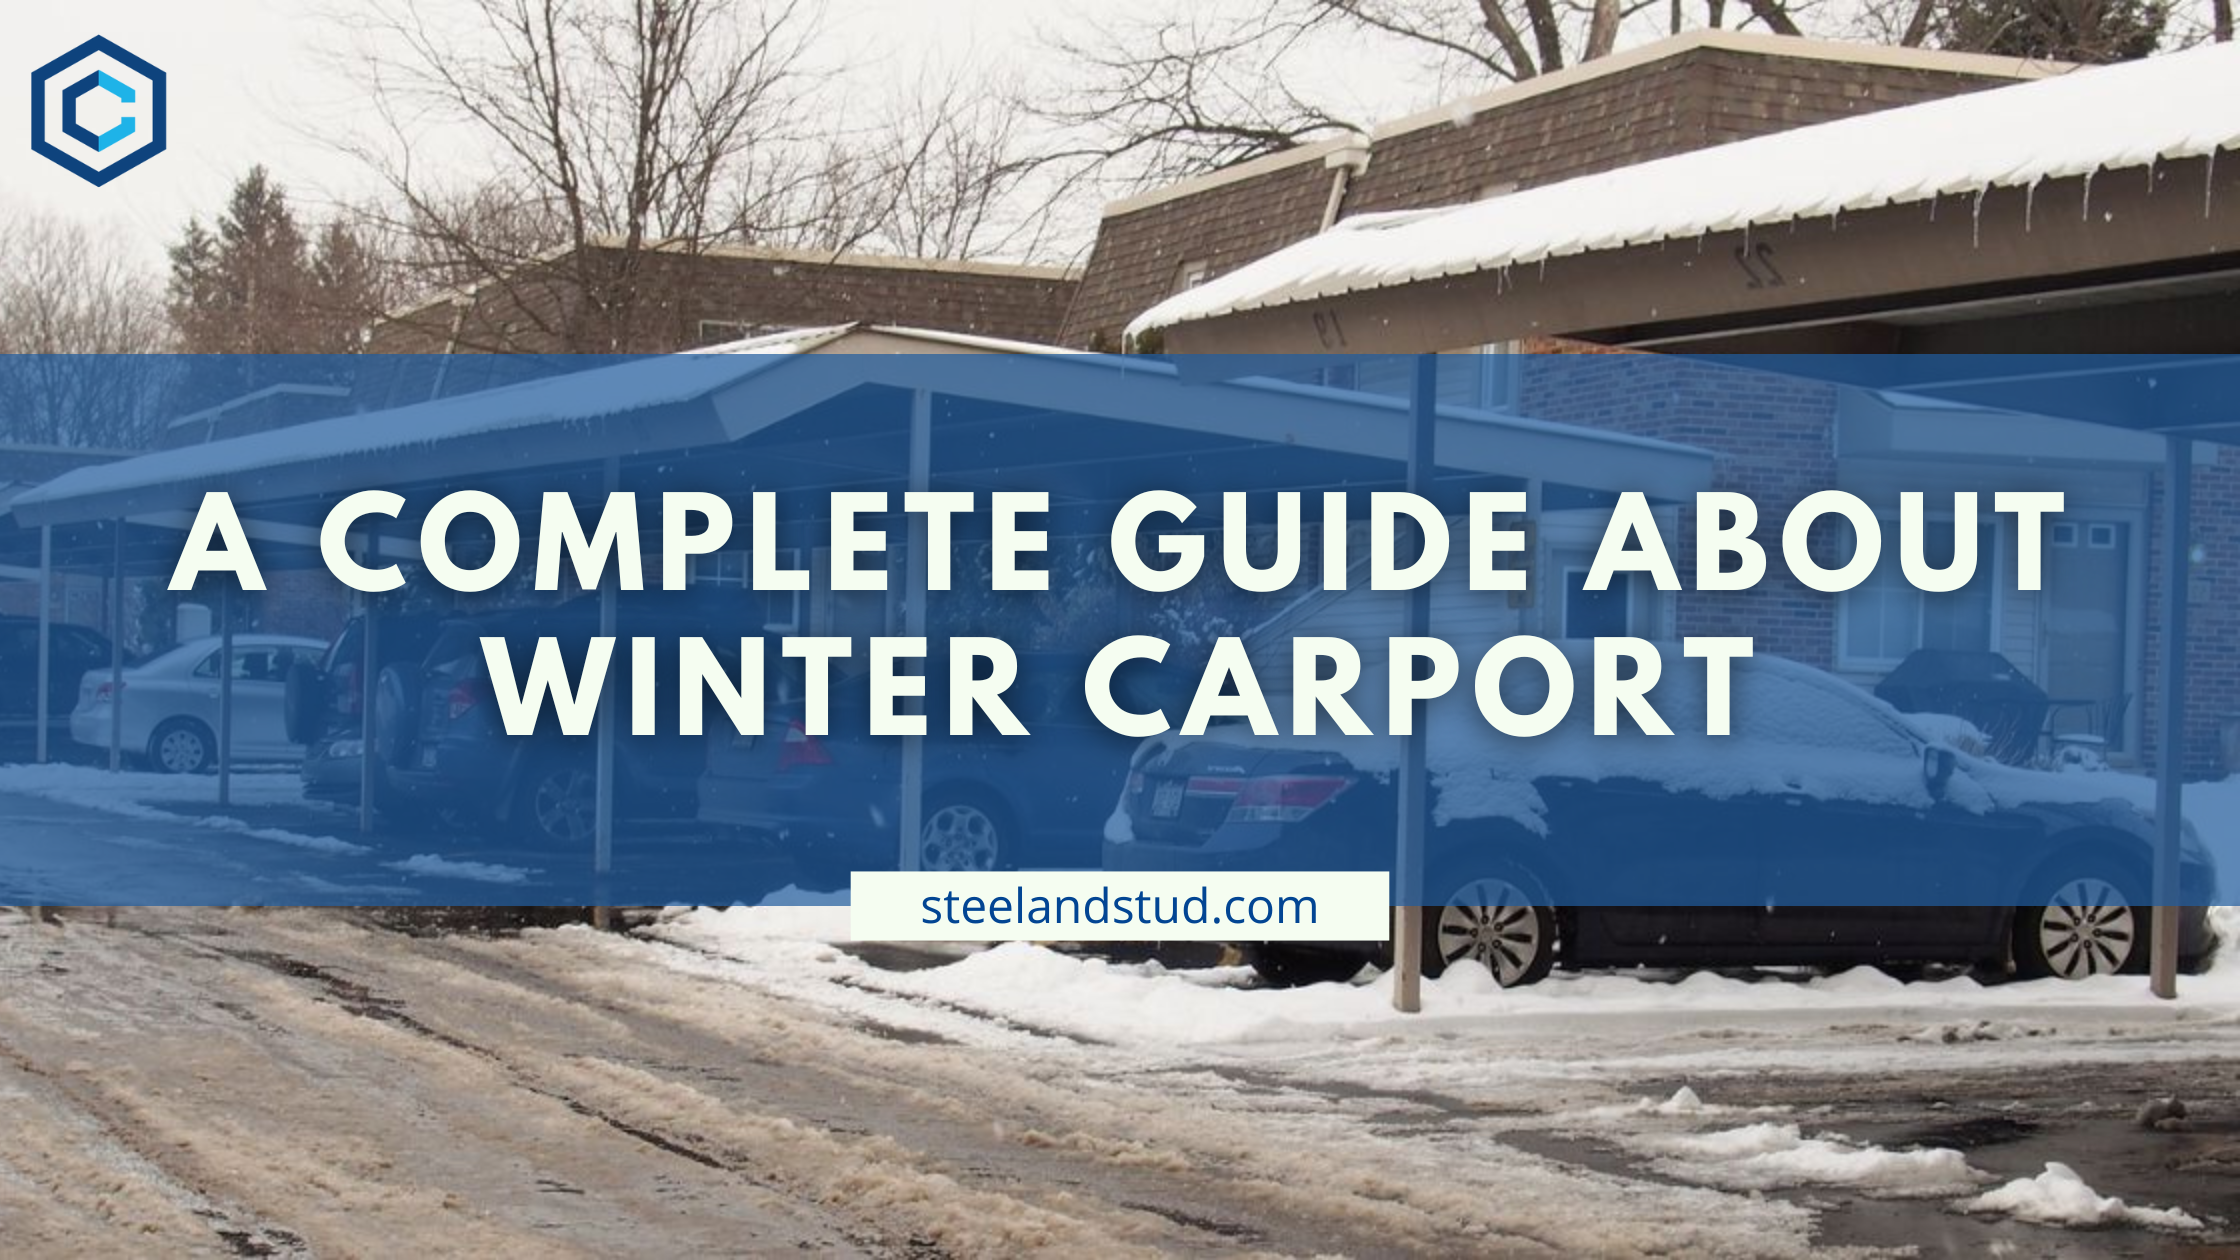 A Complete Guide About Winter Carport